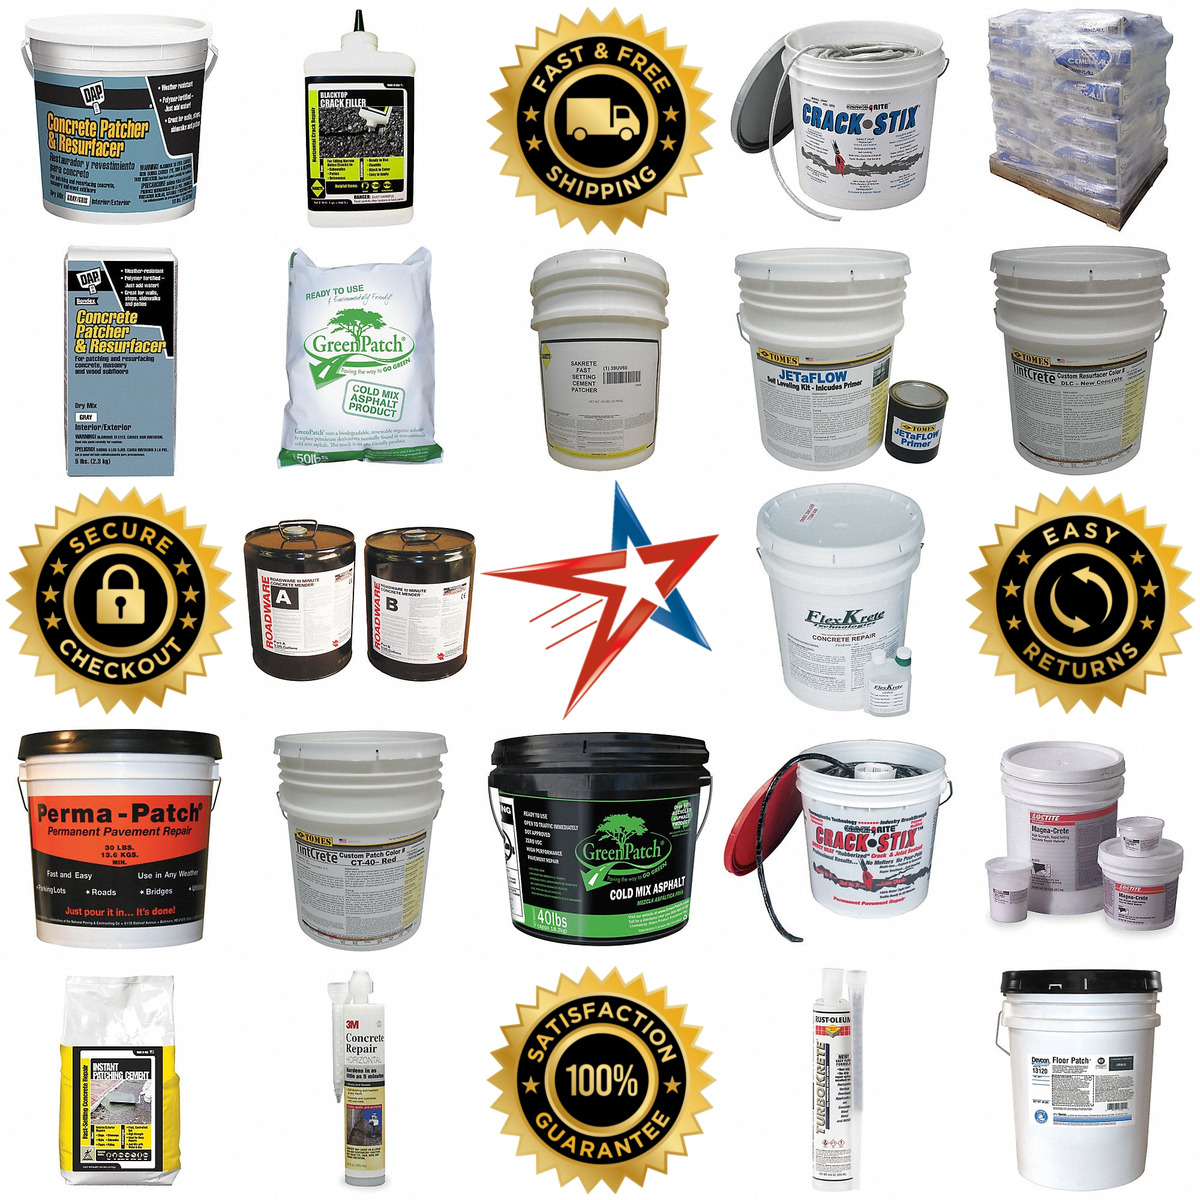 A selection of Concrete and Asphalt Repair products on GoVets